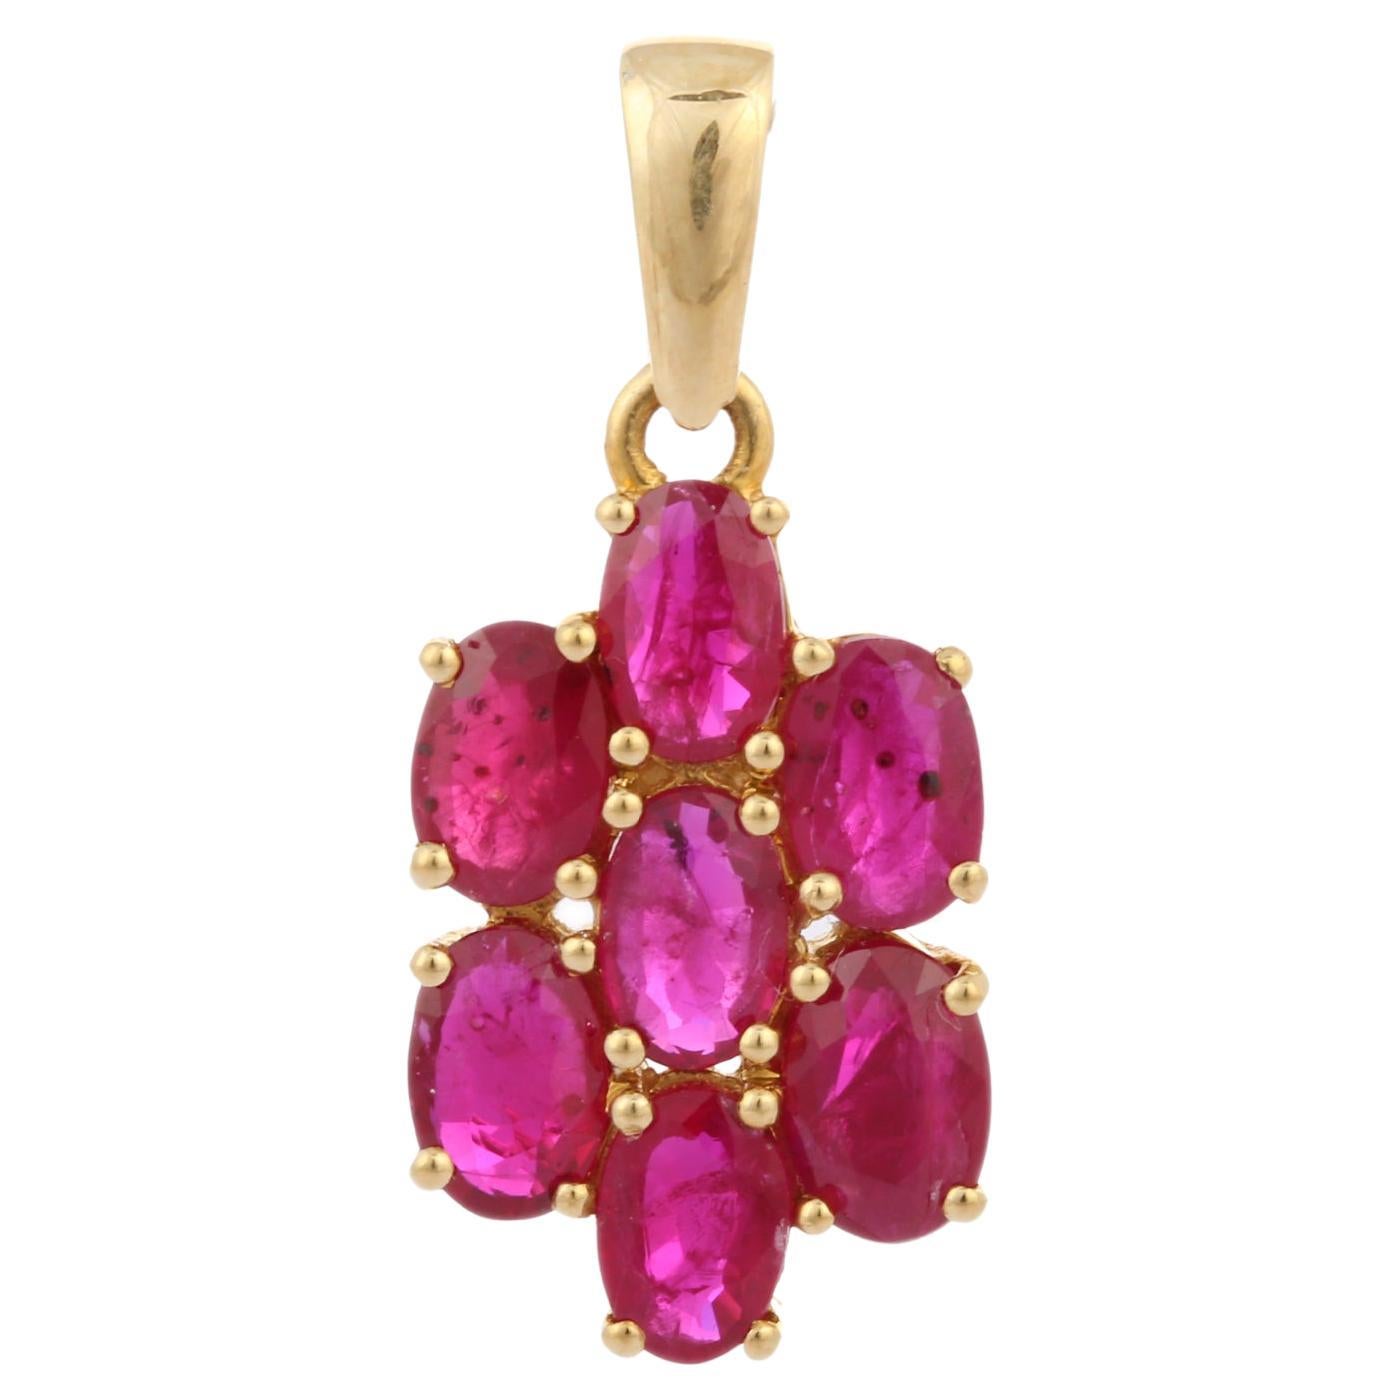 3.02 ct Alluring Oval Cut Ruby Flower Pendant in 14K Yellow Gold, Ruby Pendant For Sale